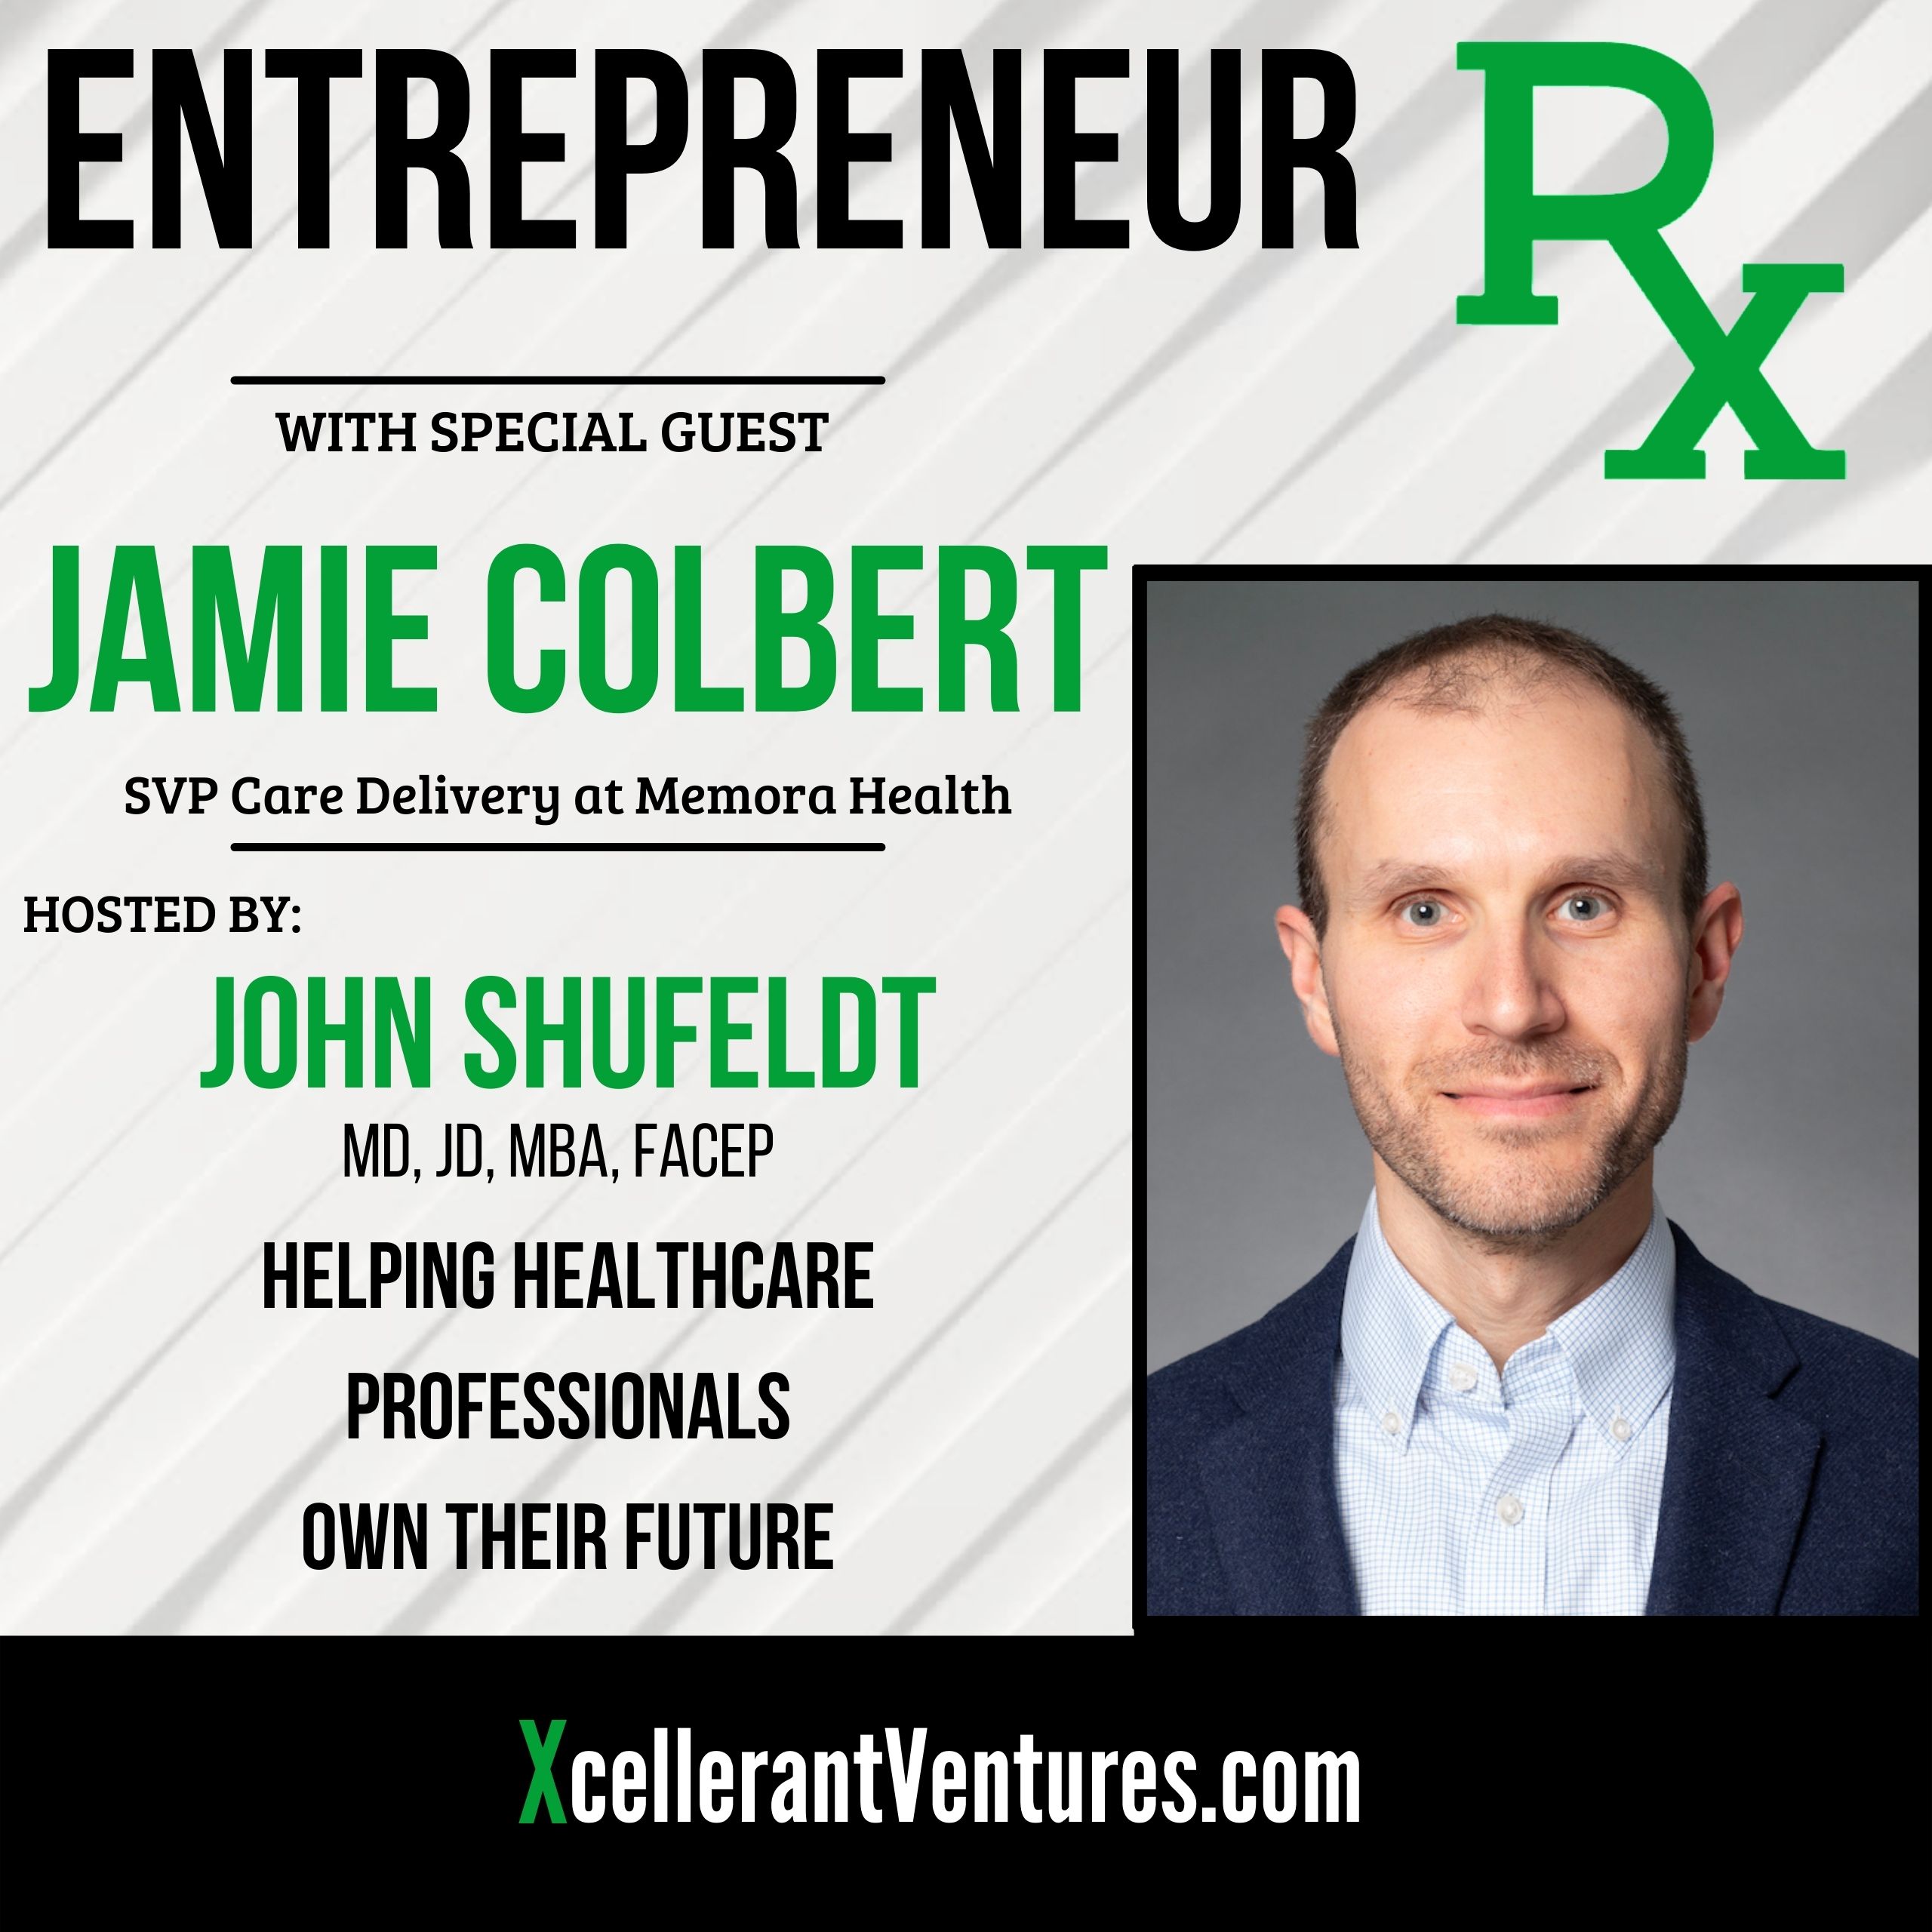 RX48: Entrepreneur Rx Interview with Jamie Colbert, MD, MBA, SVP Care Delivery at Memora Health